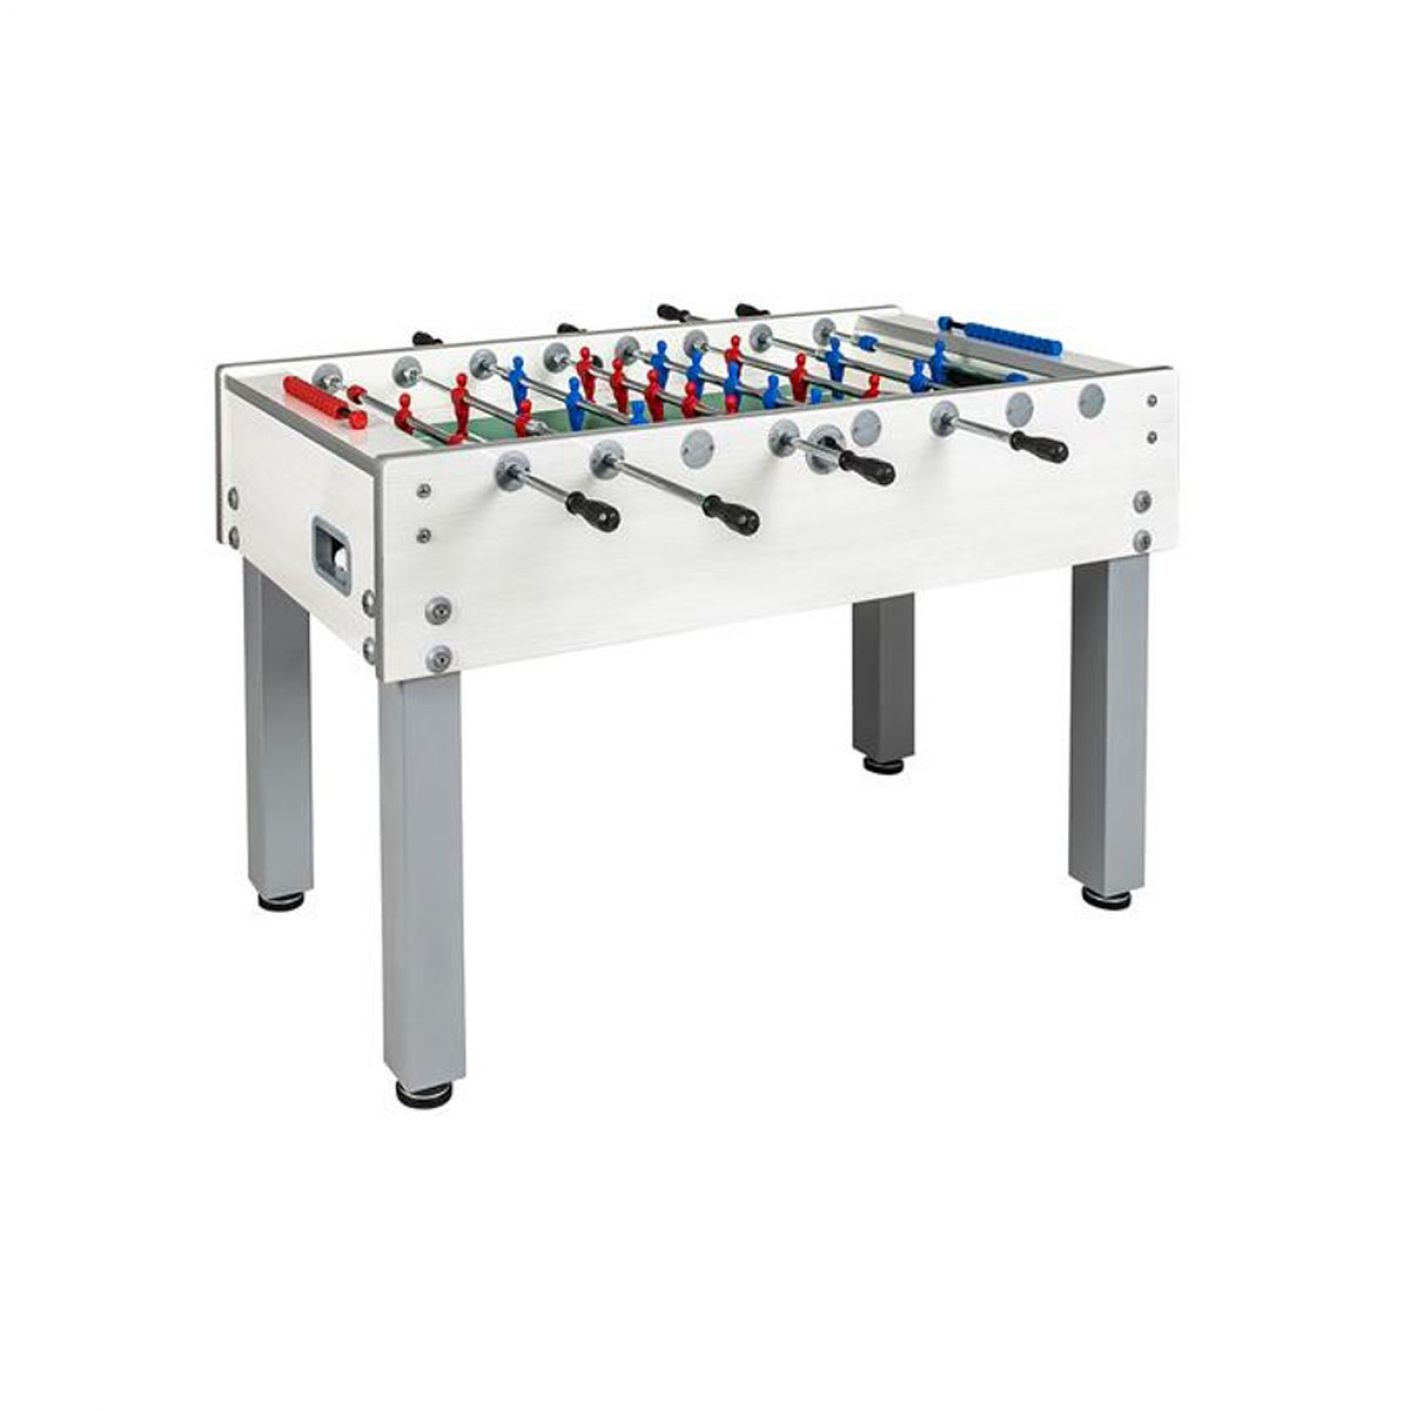 Garlando Football Table G-500 Weatherproof white with retracting temples